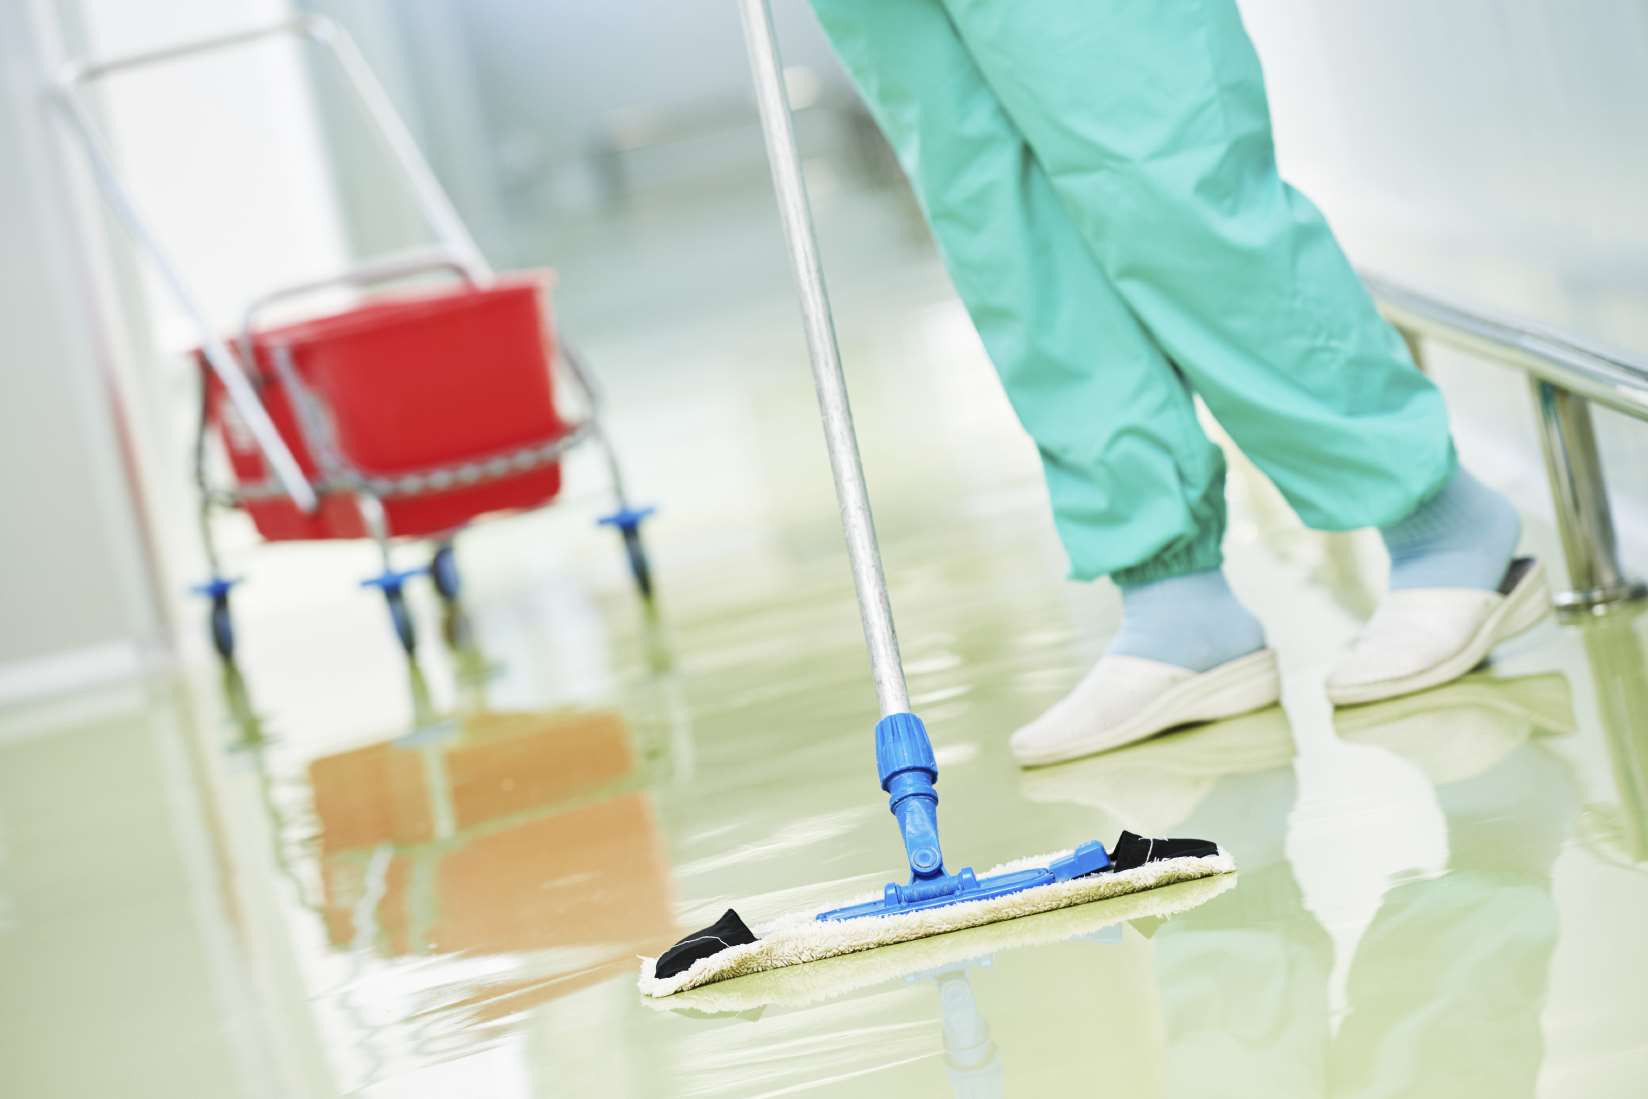 CQC inspectors said that the hospital was not clean enough